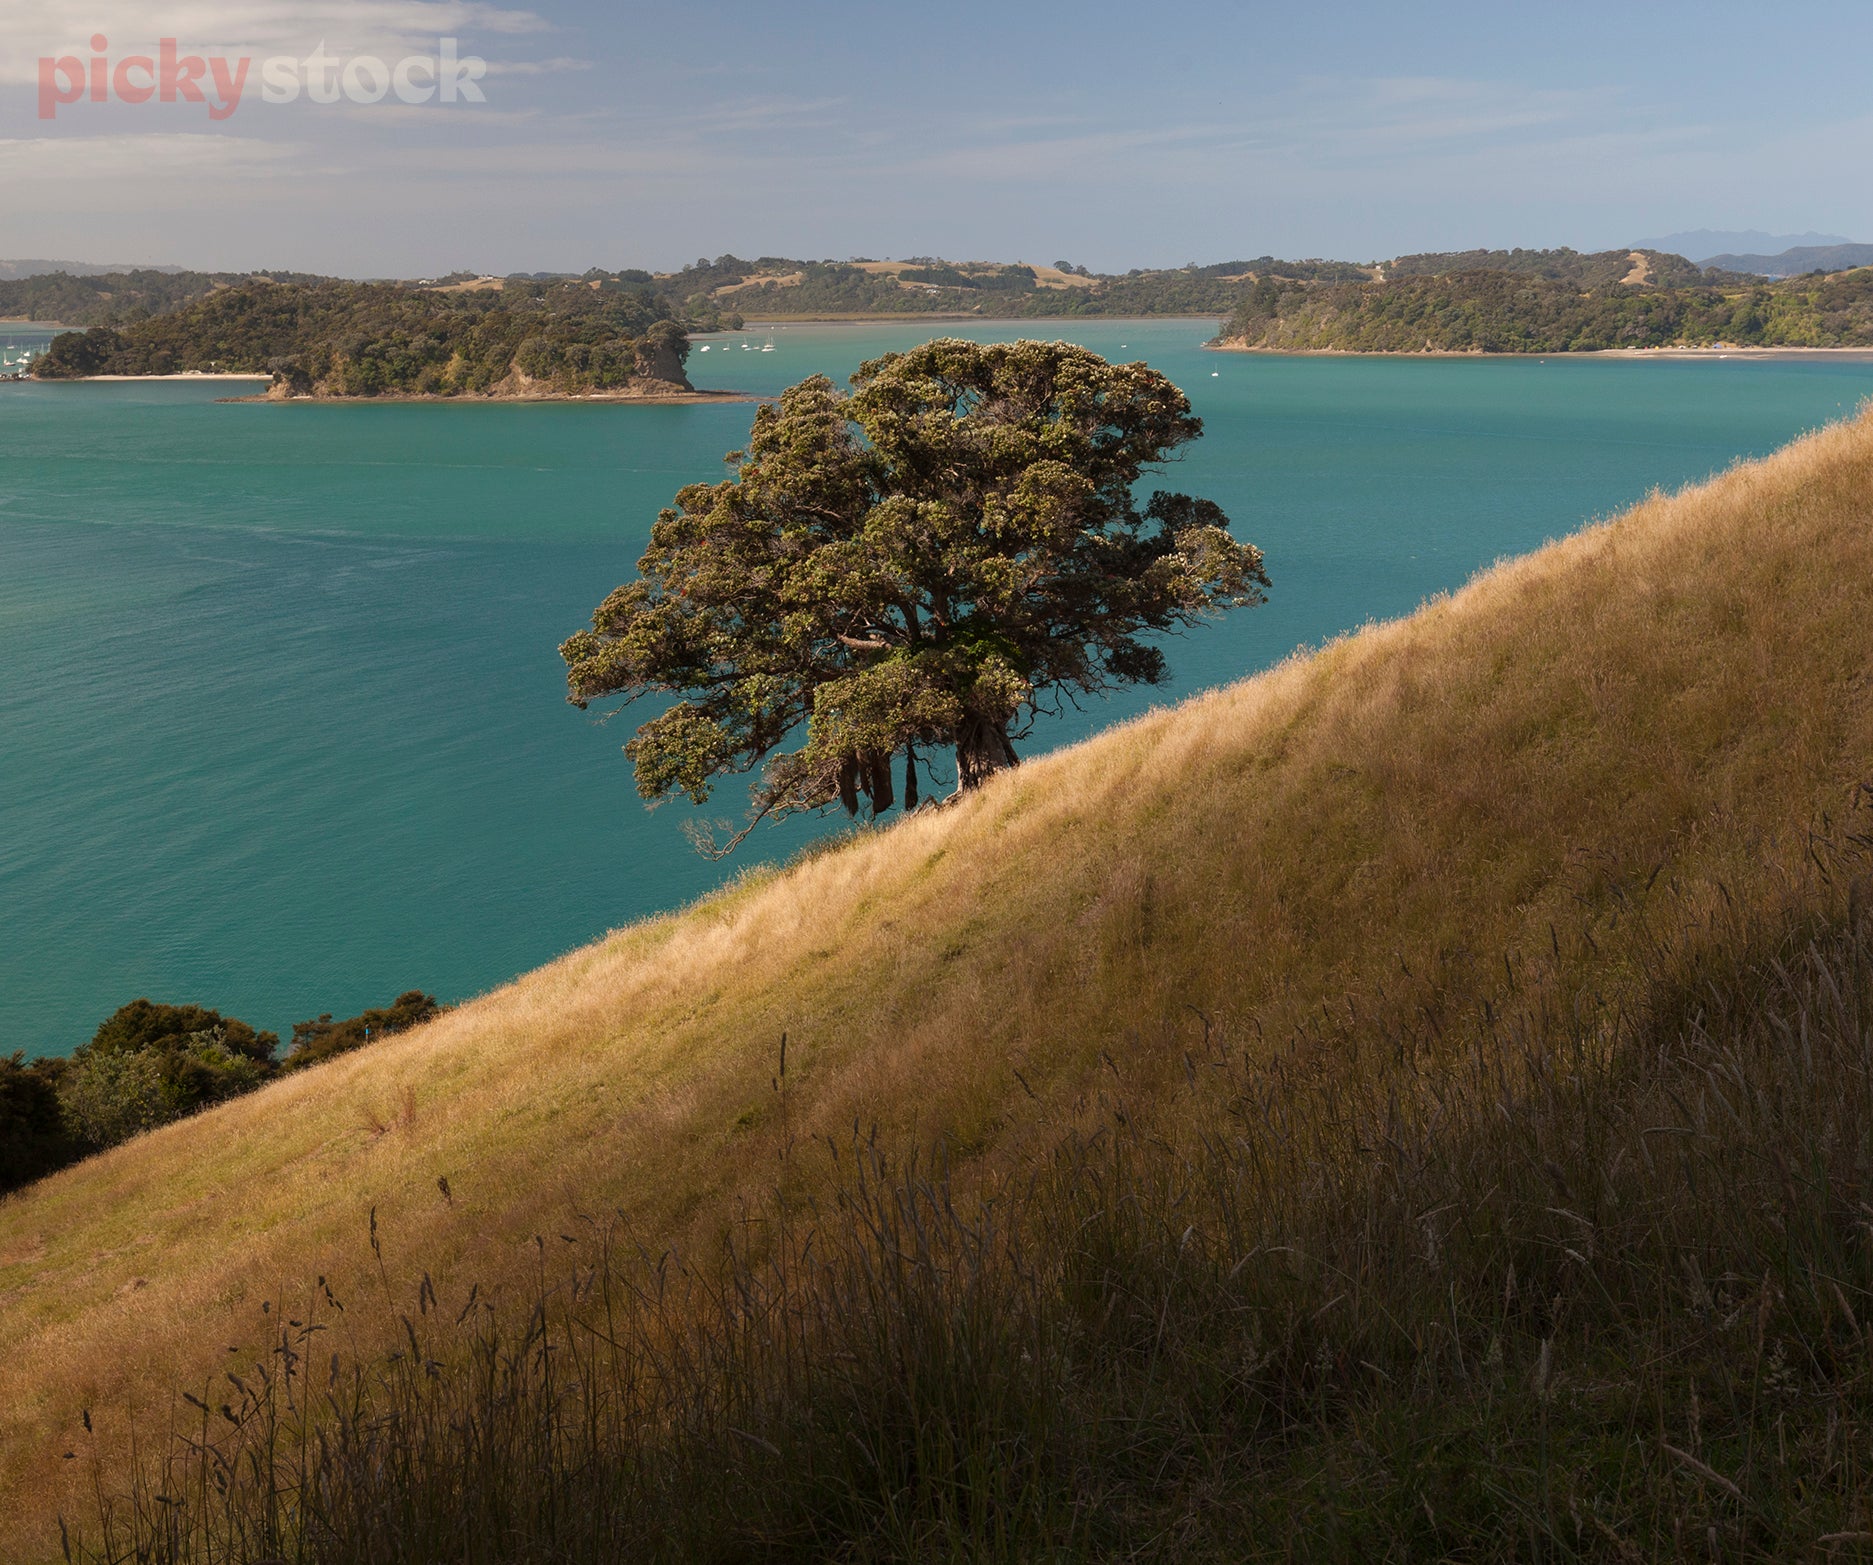 A single Pohutukawa, a native new zealand tree on soft golden cliff, covered in dry grass, overlooking bay. Water is a rich blue, sky is a light blue. 